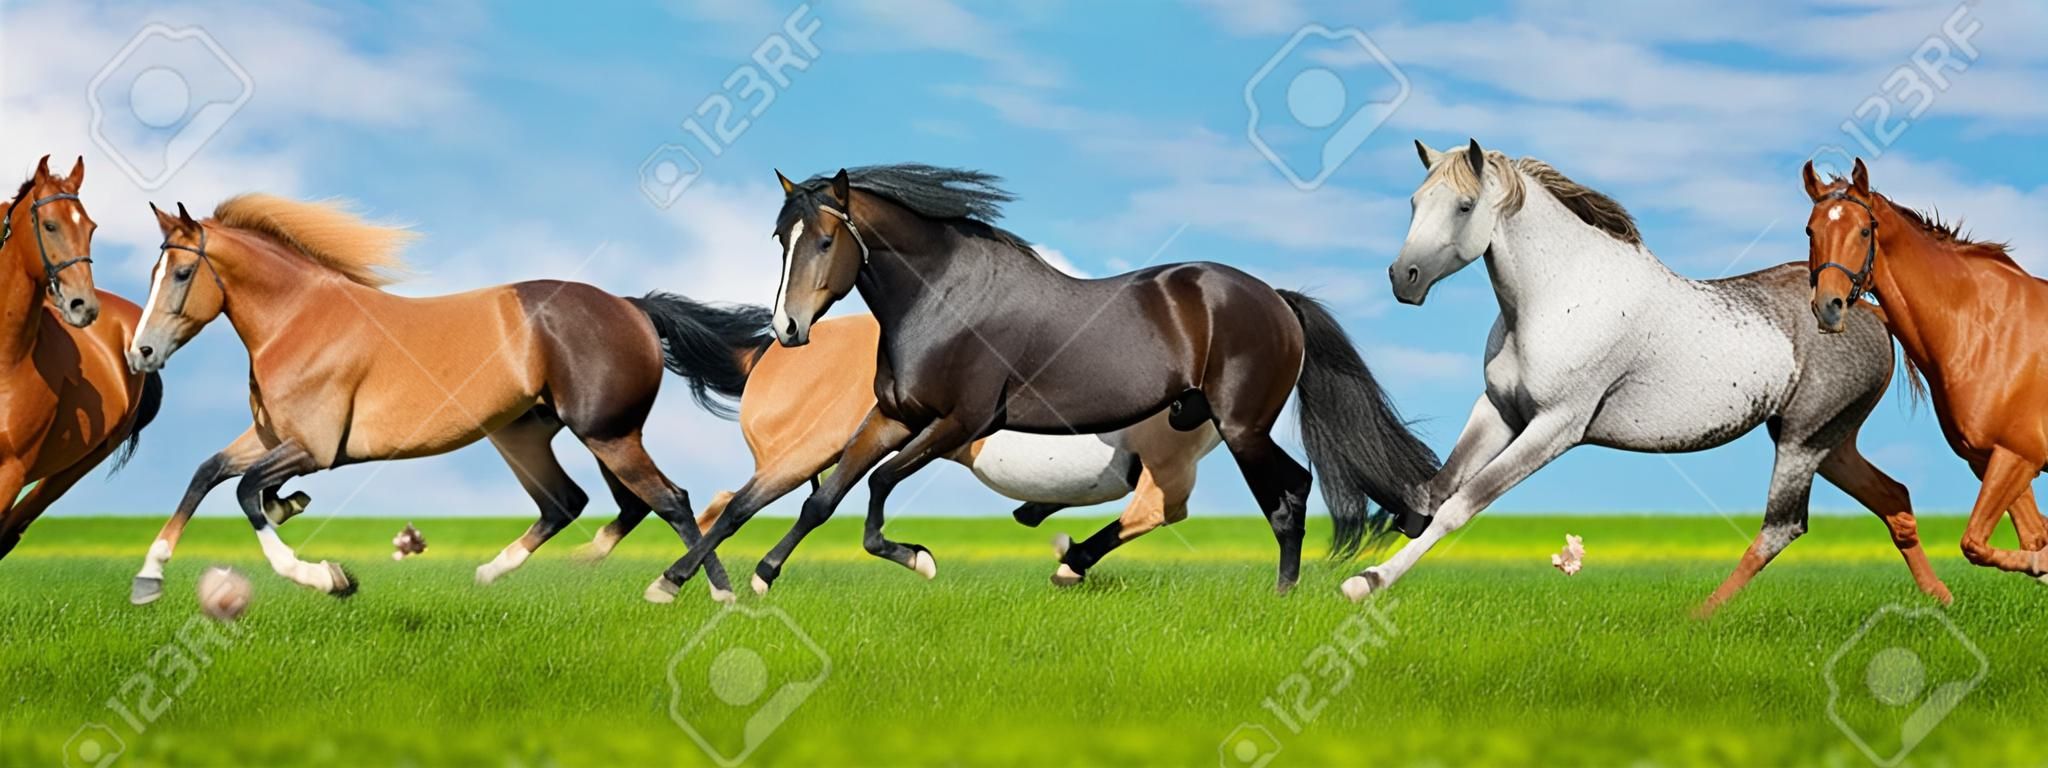 Horses free run gallop i green field with blue sky behind